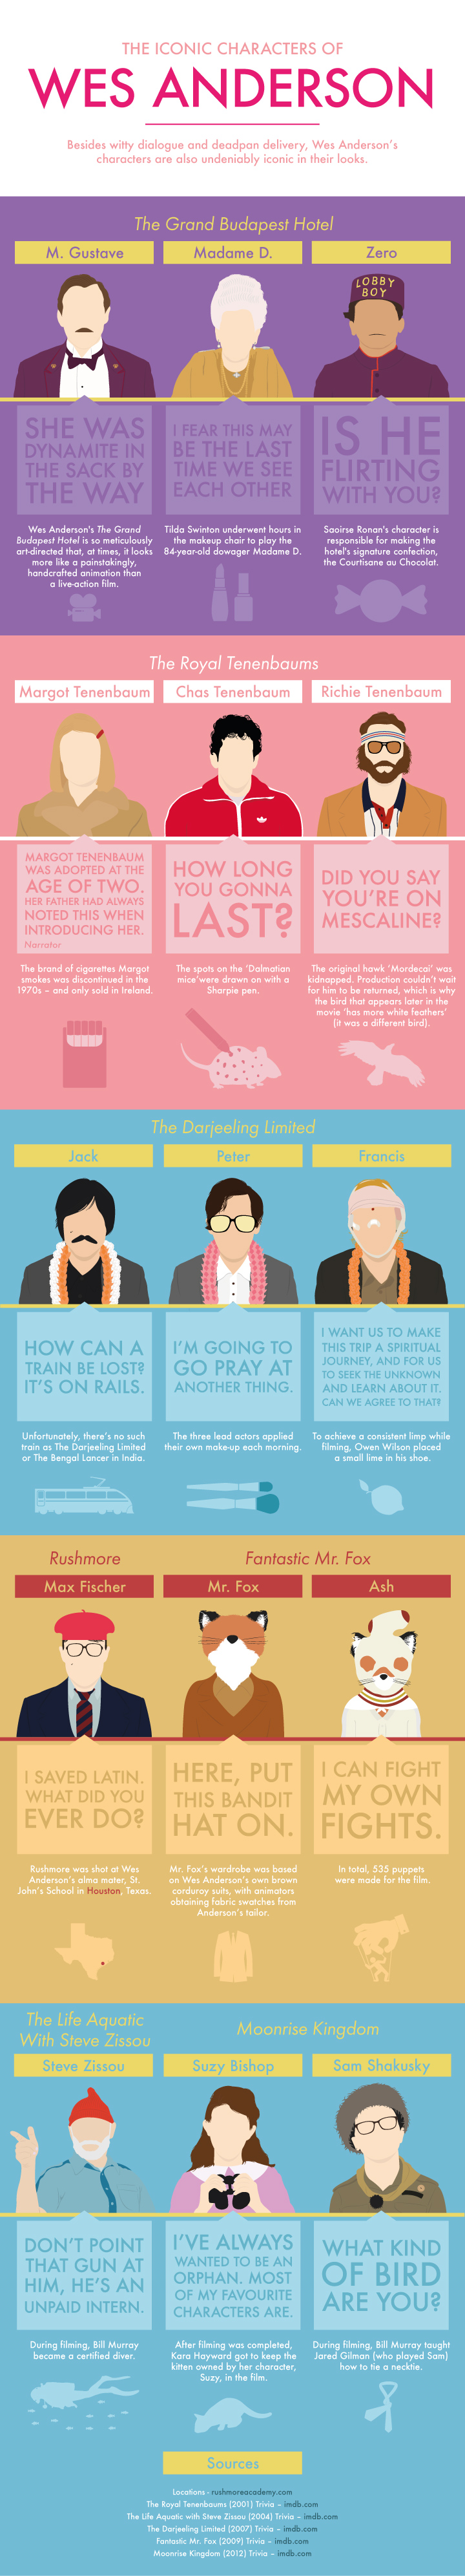 The Iconic Characters of Wes Anderson